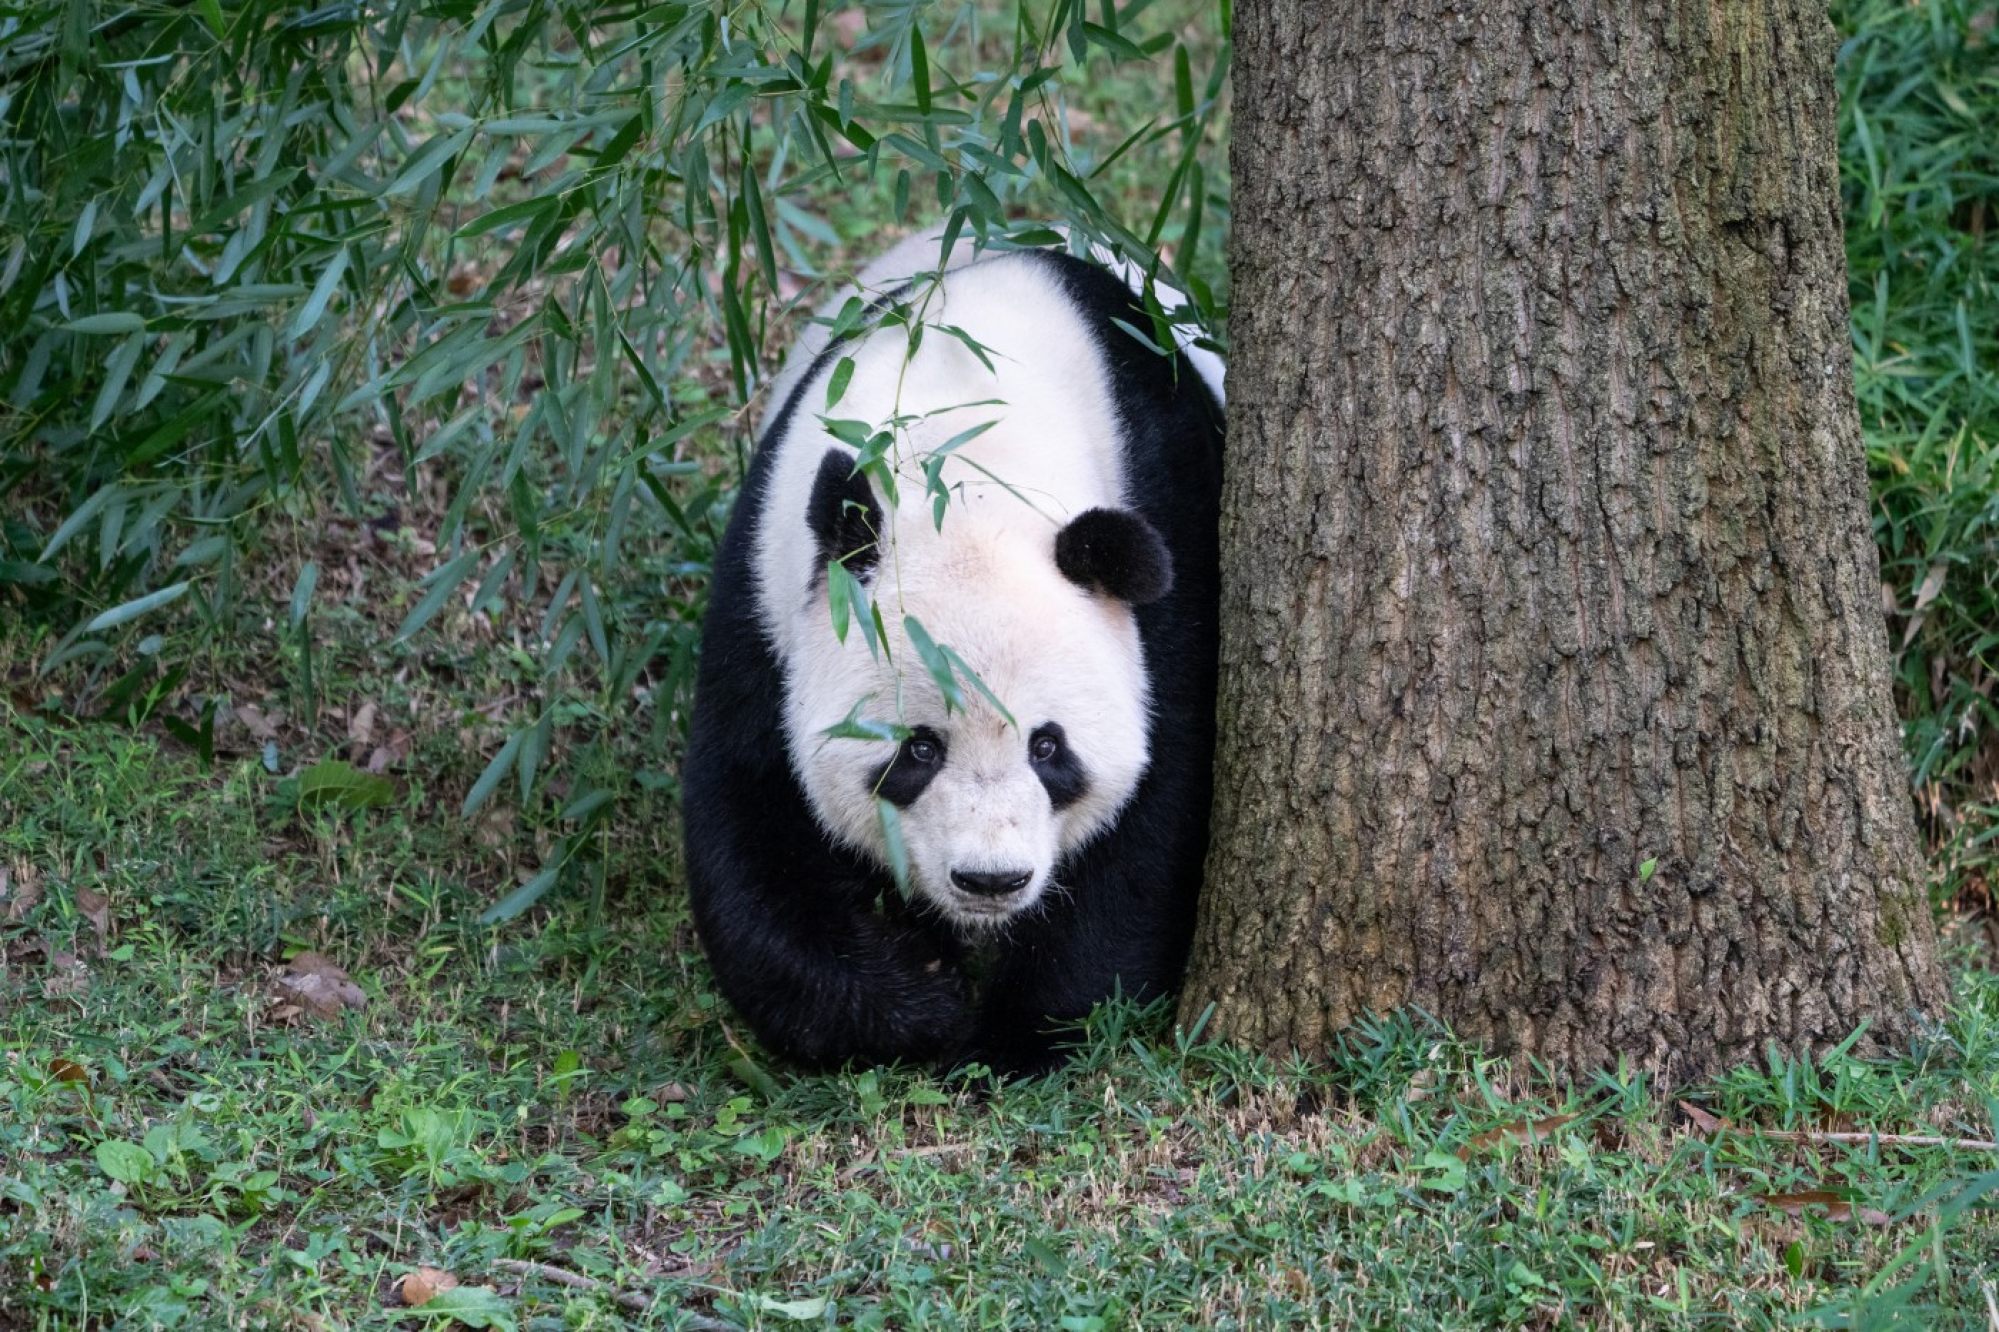 Giant panda Tian Tian explores his outdoor habitat at the National Zoo in Washington on Sept. 11. Photo: Smithsonian’s National Zoo and Conservation Biology Institute.